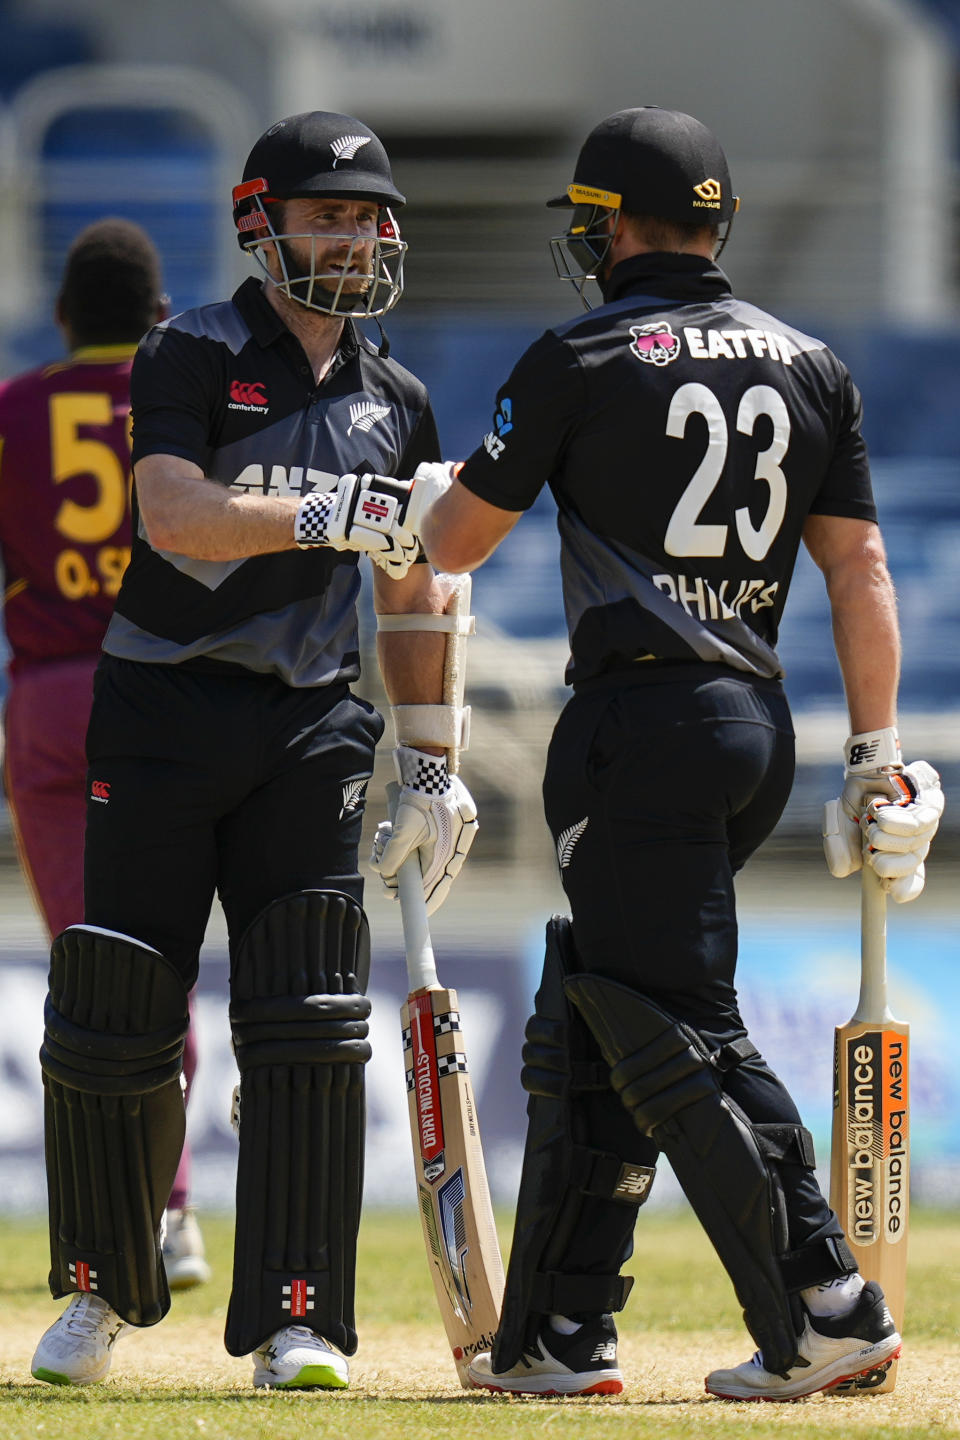 New Zealand's captain Kane Williamson celebrates with Glenn Phillips during their partnership against the West Indies during the third T20 cricket match at Sabina Park in Kingston, Jamaica, Sunday, Aug. 14, 2022. (AP Photo/Ramon Espinosa)